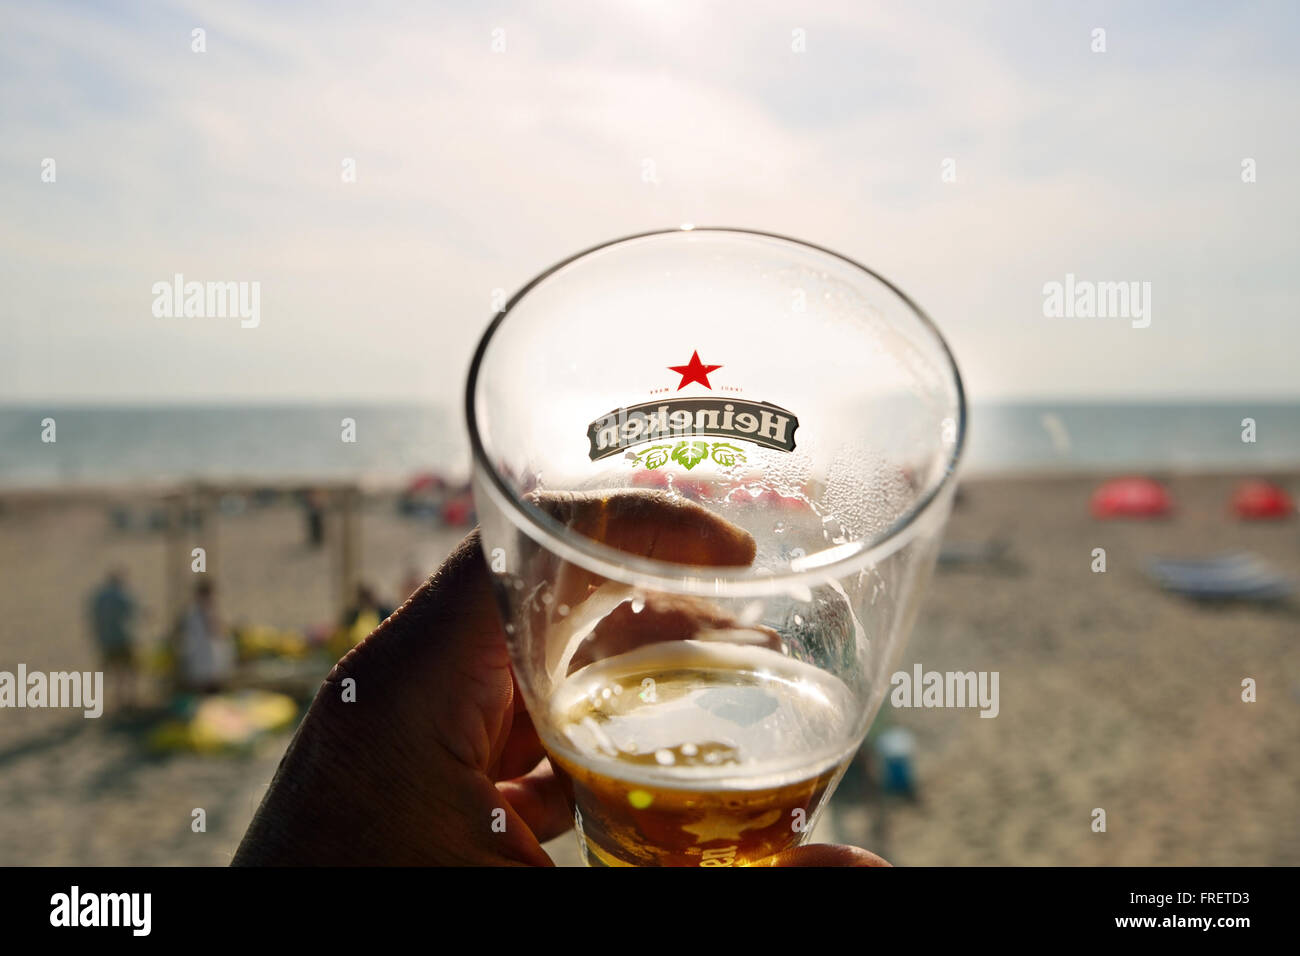 Hand holding a Glass of Heineken beer when the sun sets on the beach. Stock Photo